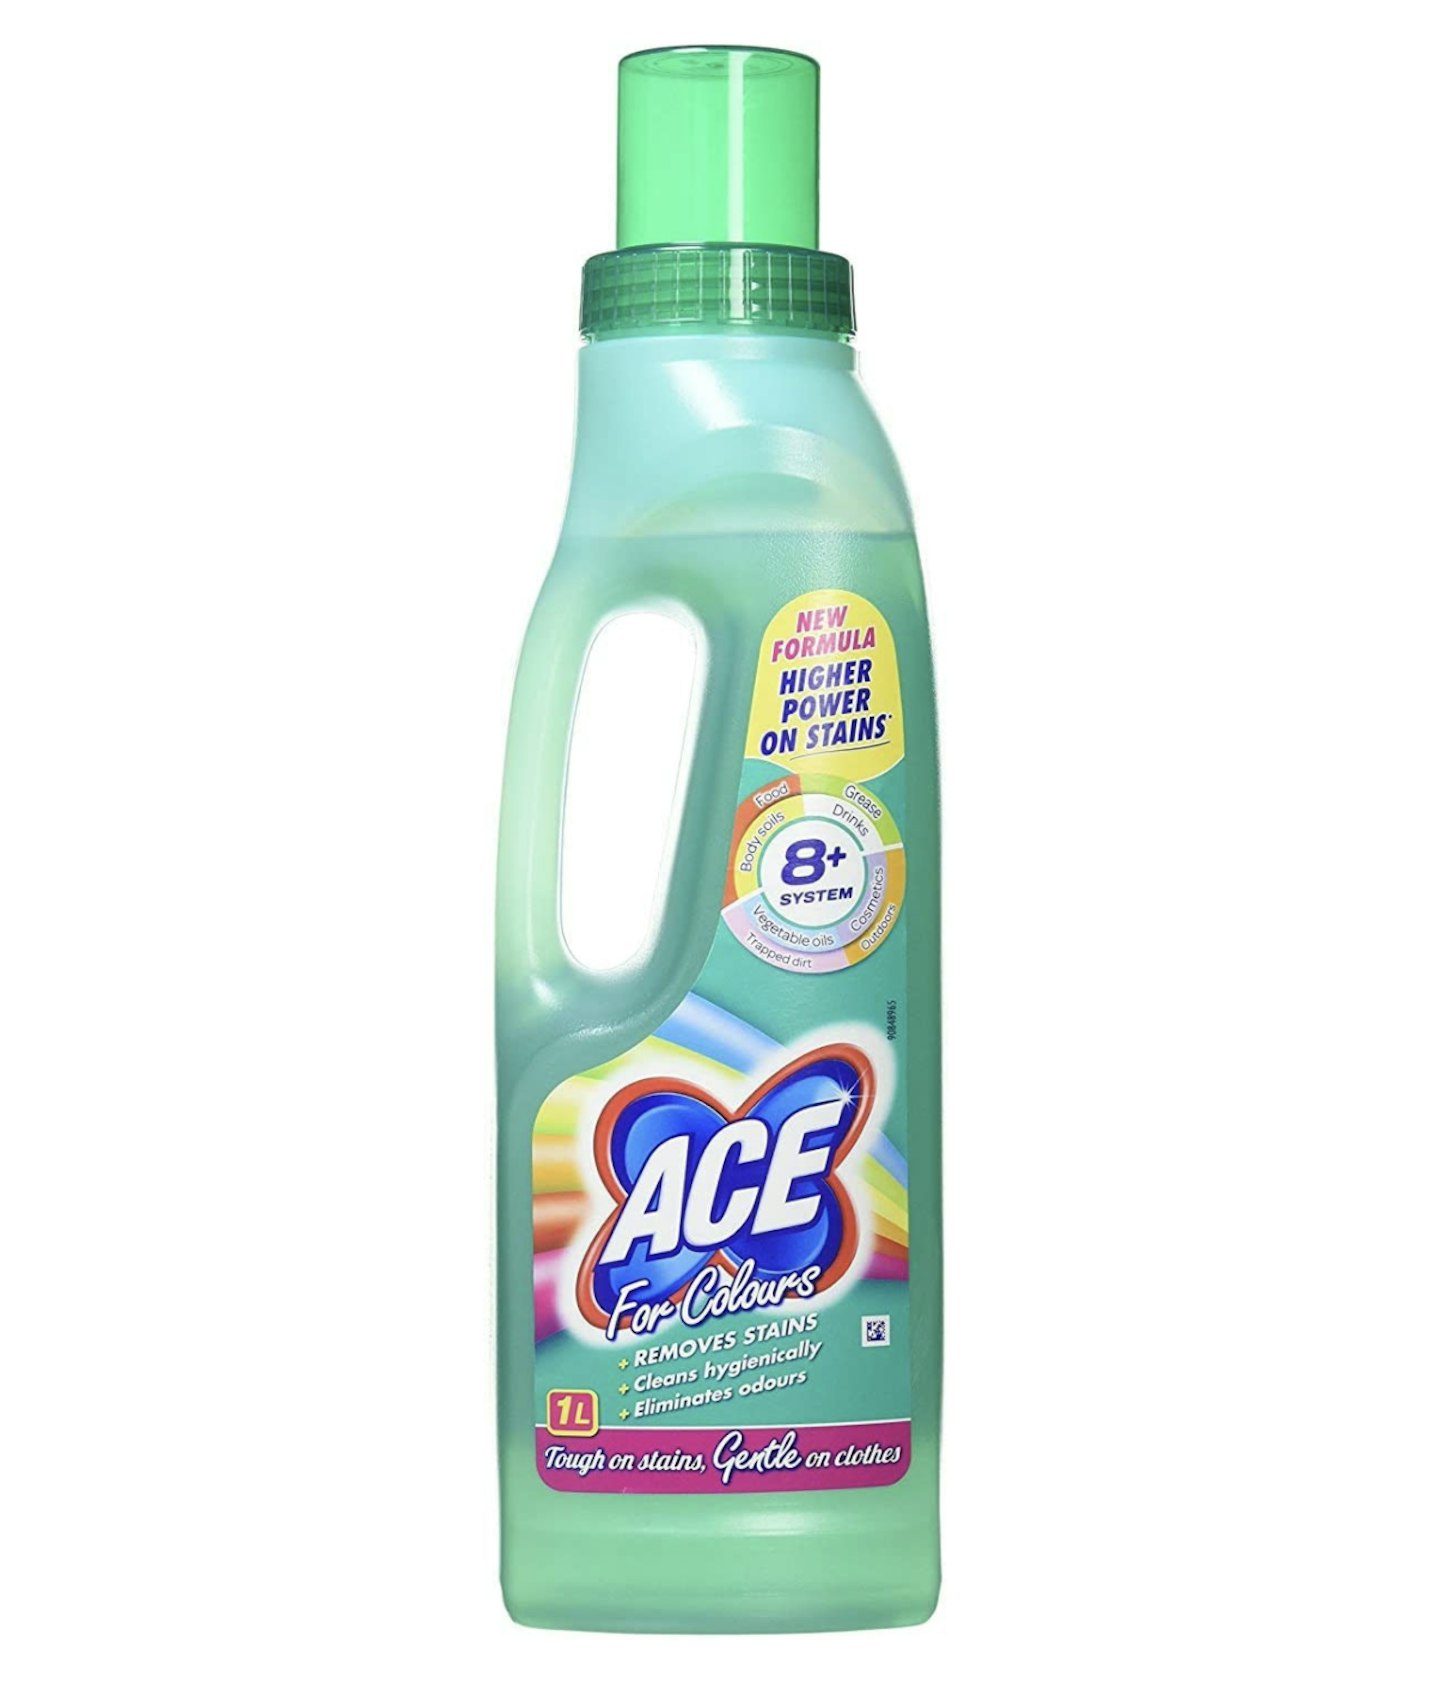 https://images.bauerhosting.com/legacy/media/6101/3c02/13f3/dd3c/67a4/f36f/ace-stain-remover.png?auto=format&w=1440&q=80